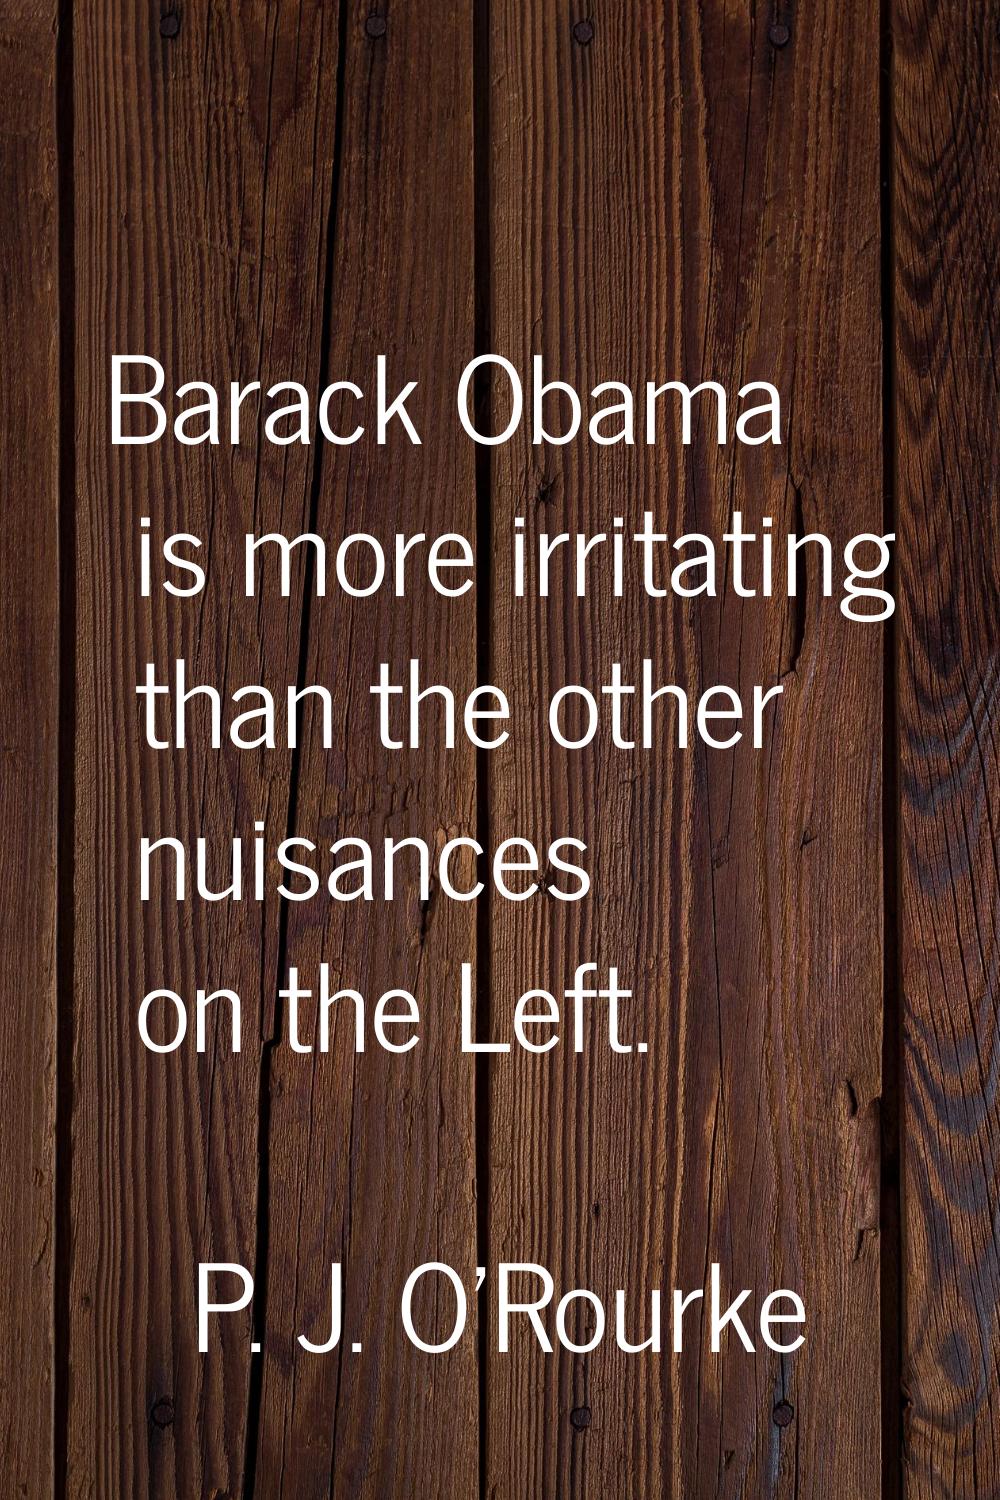 Barack Obama is more irritating than the other nuisances on the Left.